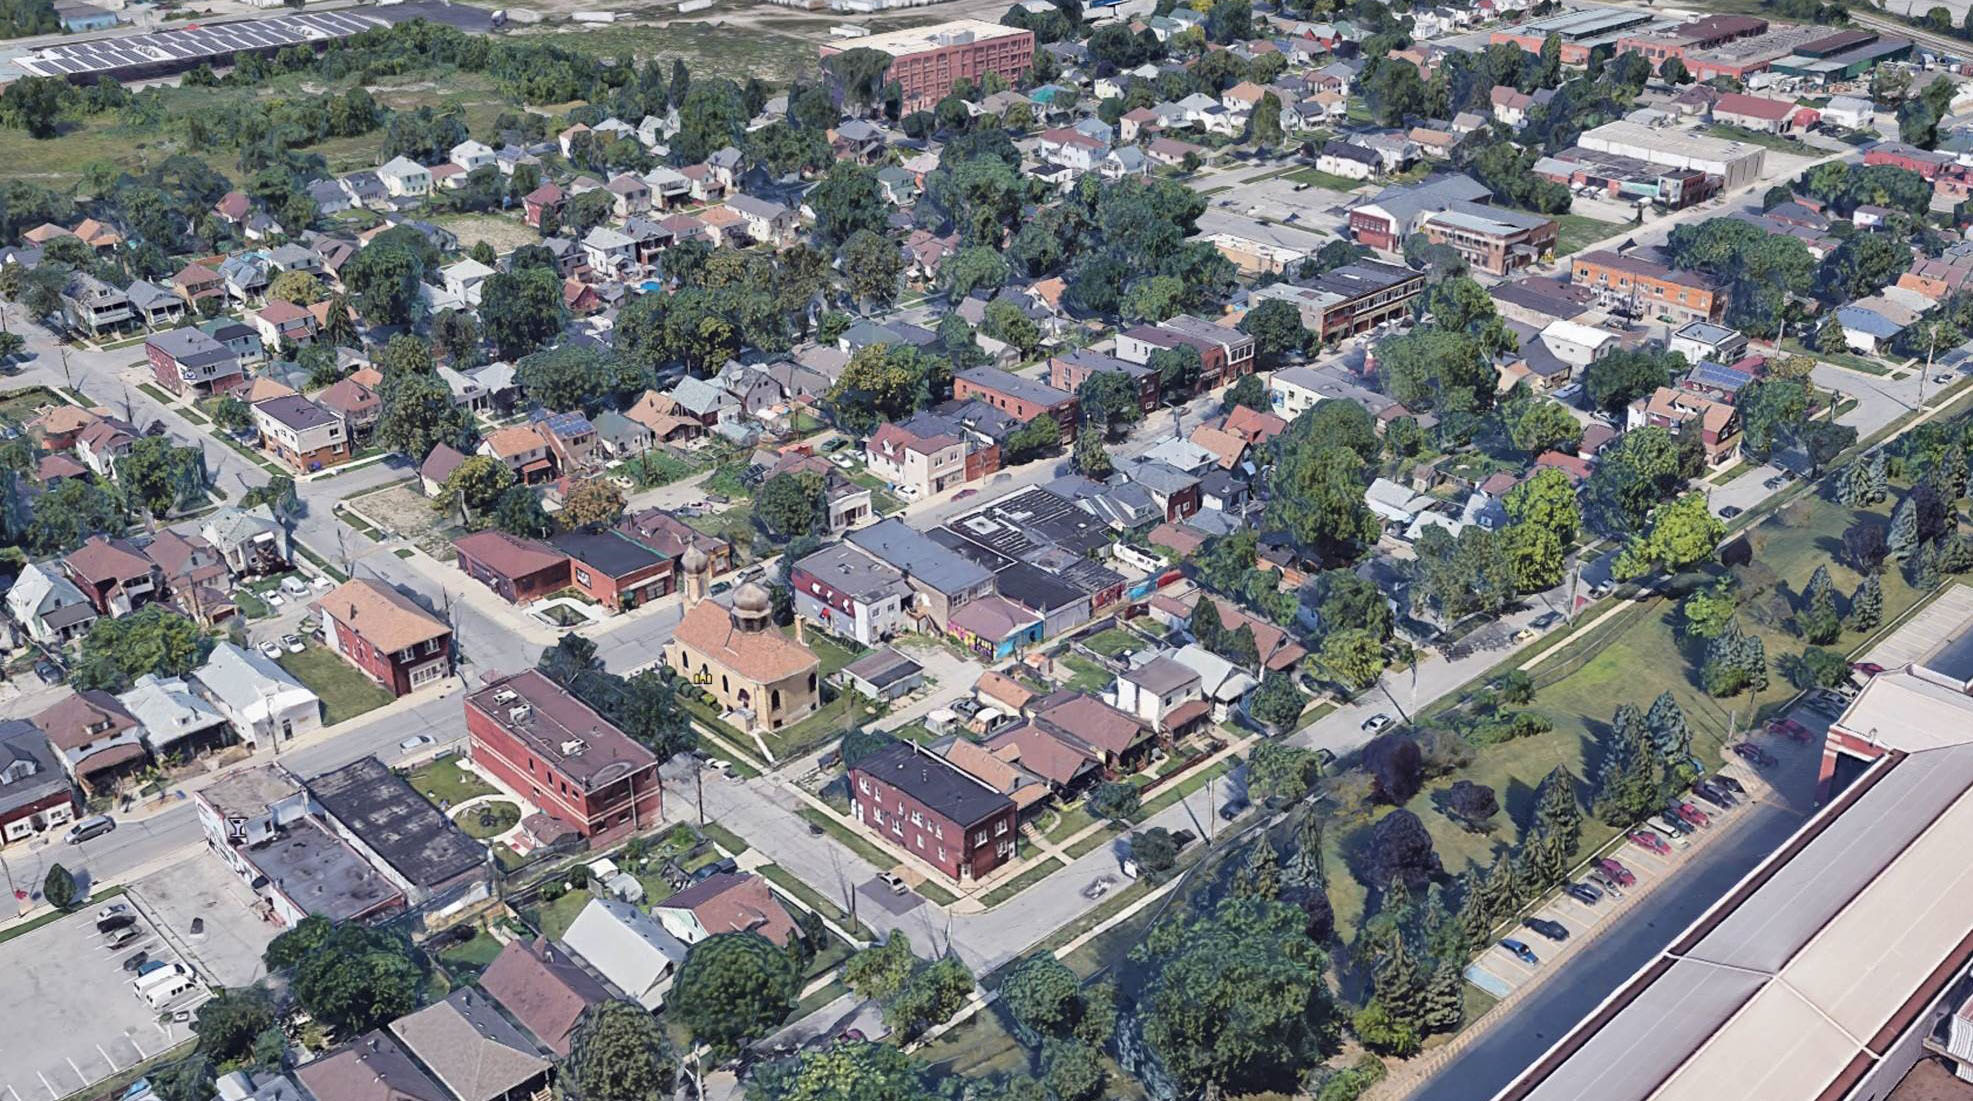 Overhead view of Ford City